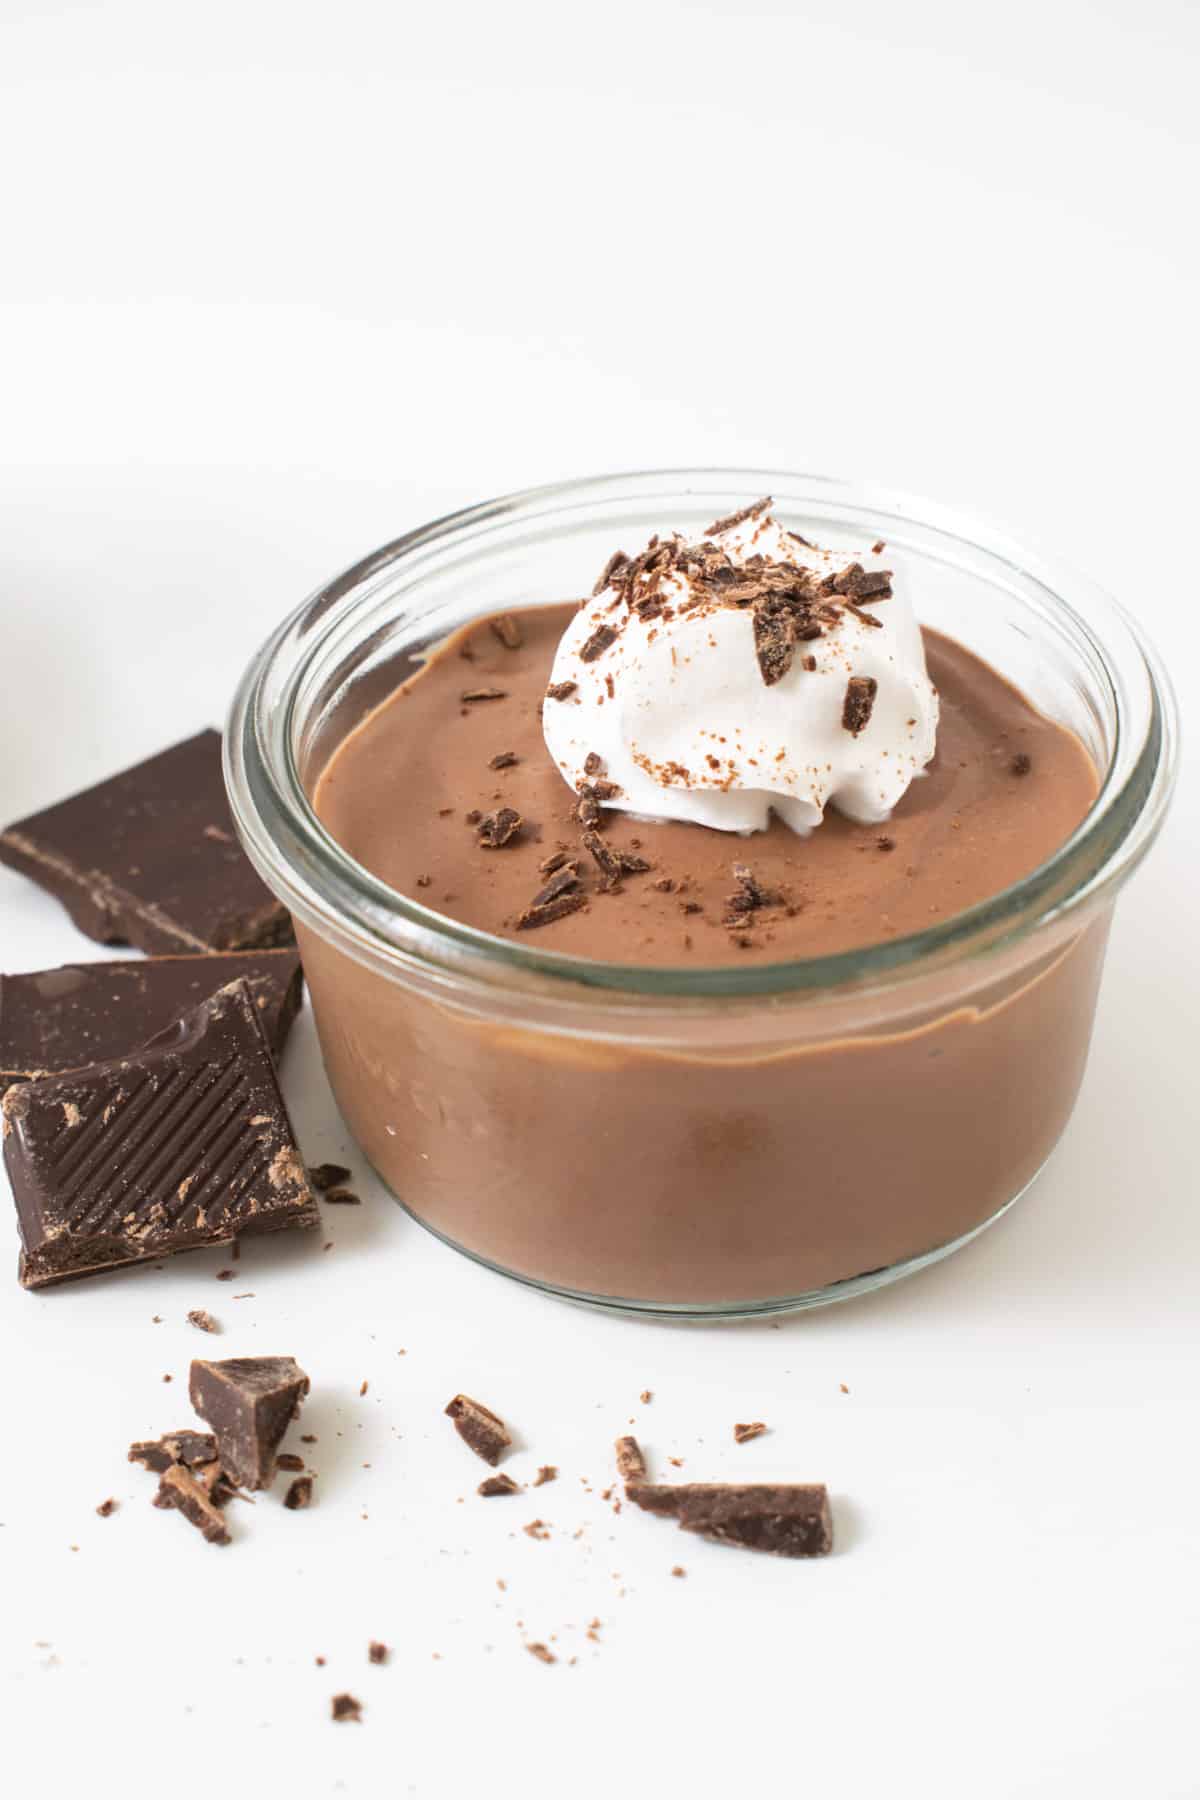 A portion of mousse topped with vegan crean and dark chocolate.